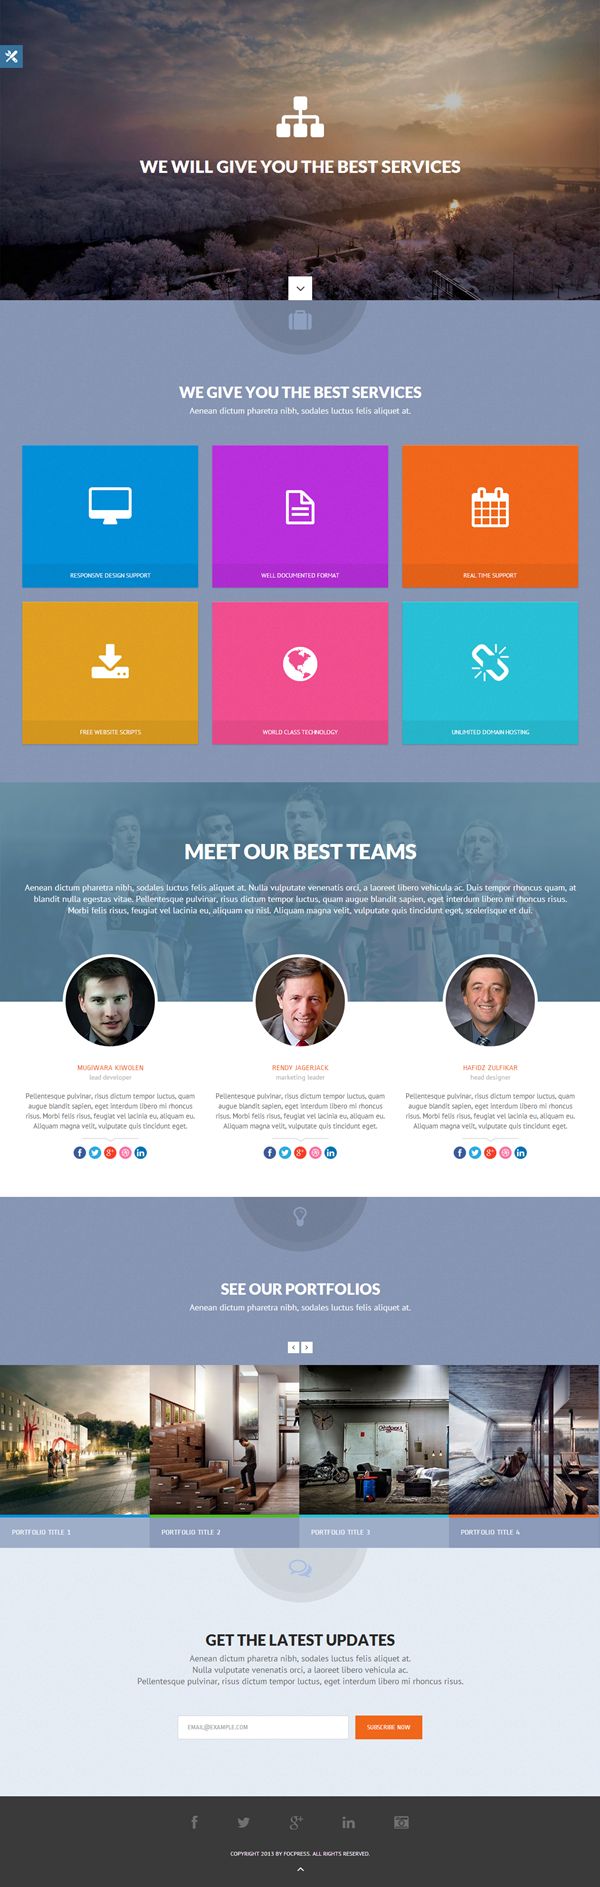 Zeto Responsive One Page Template